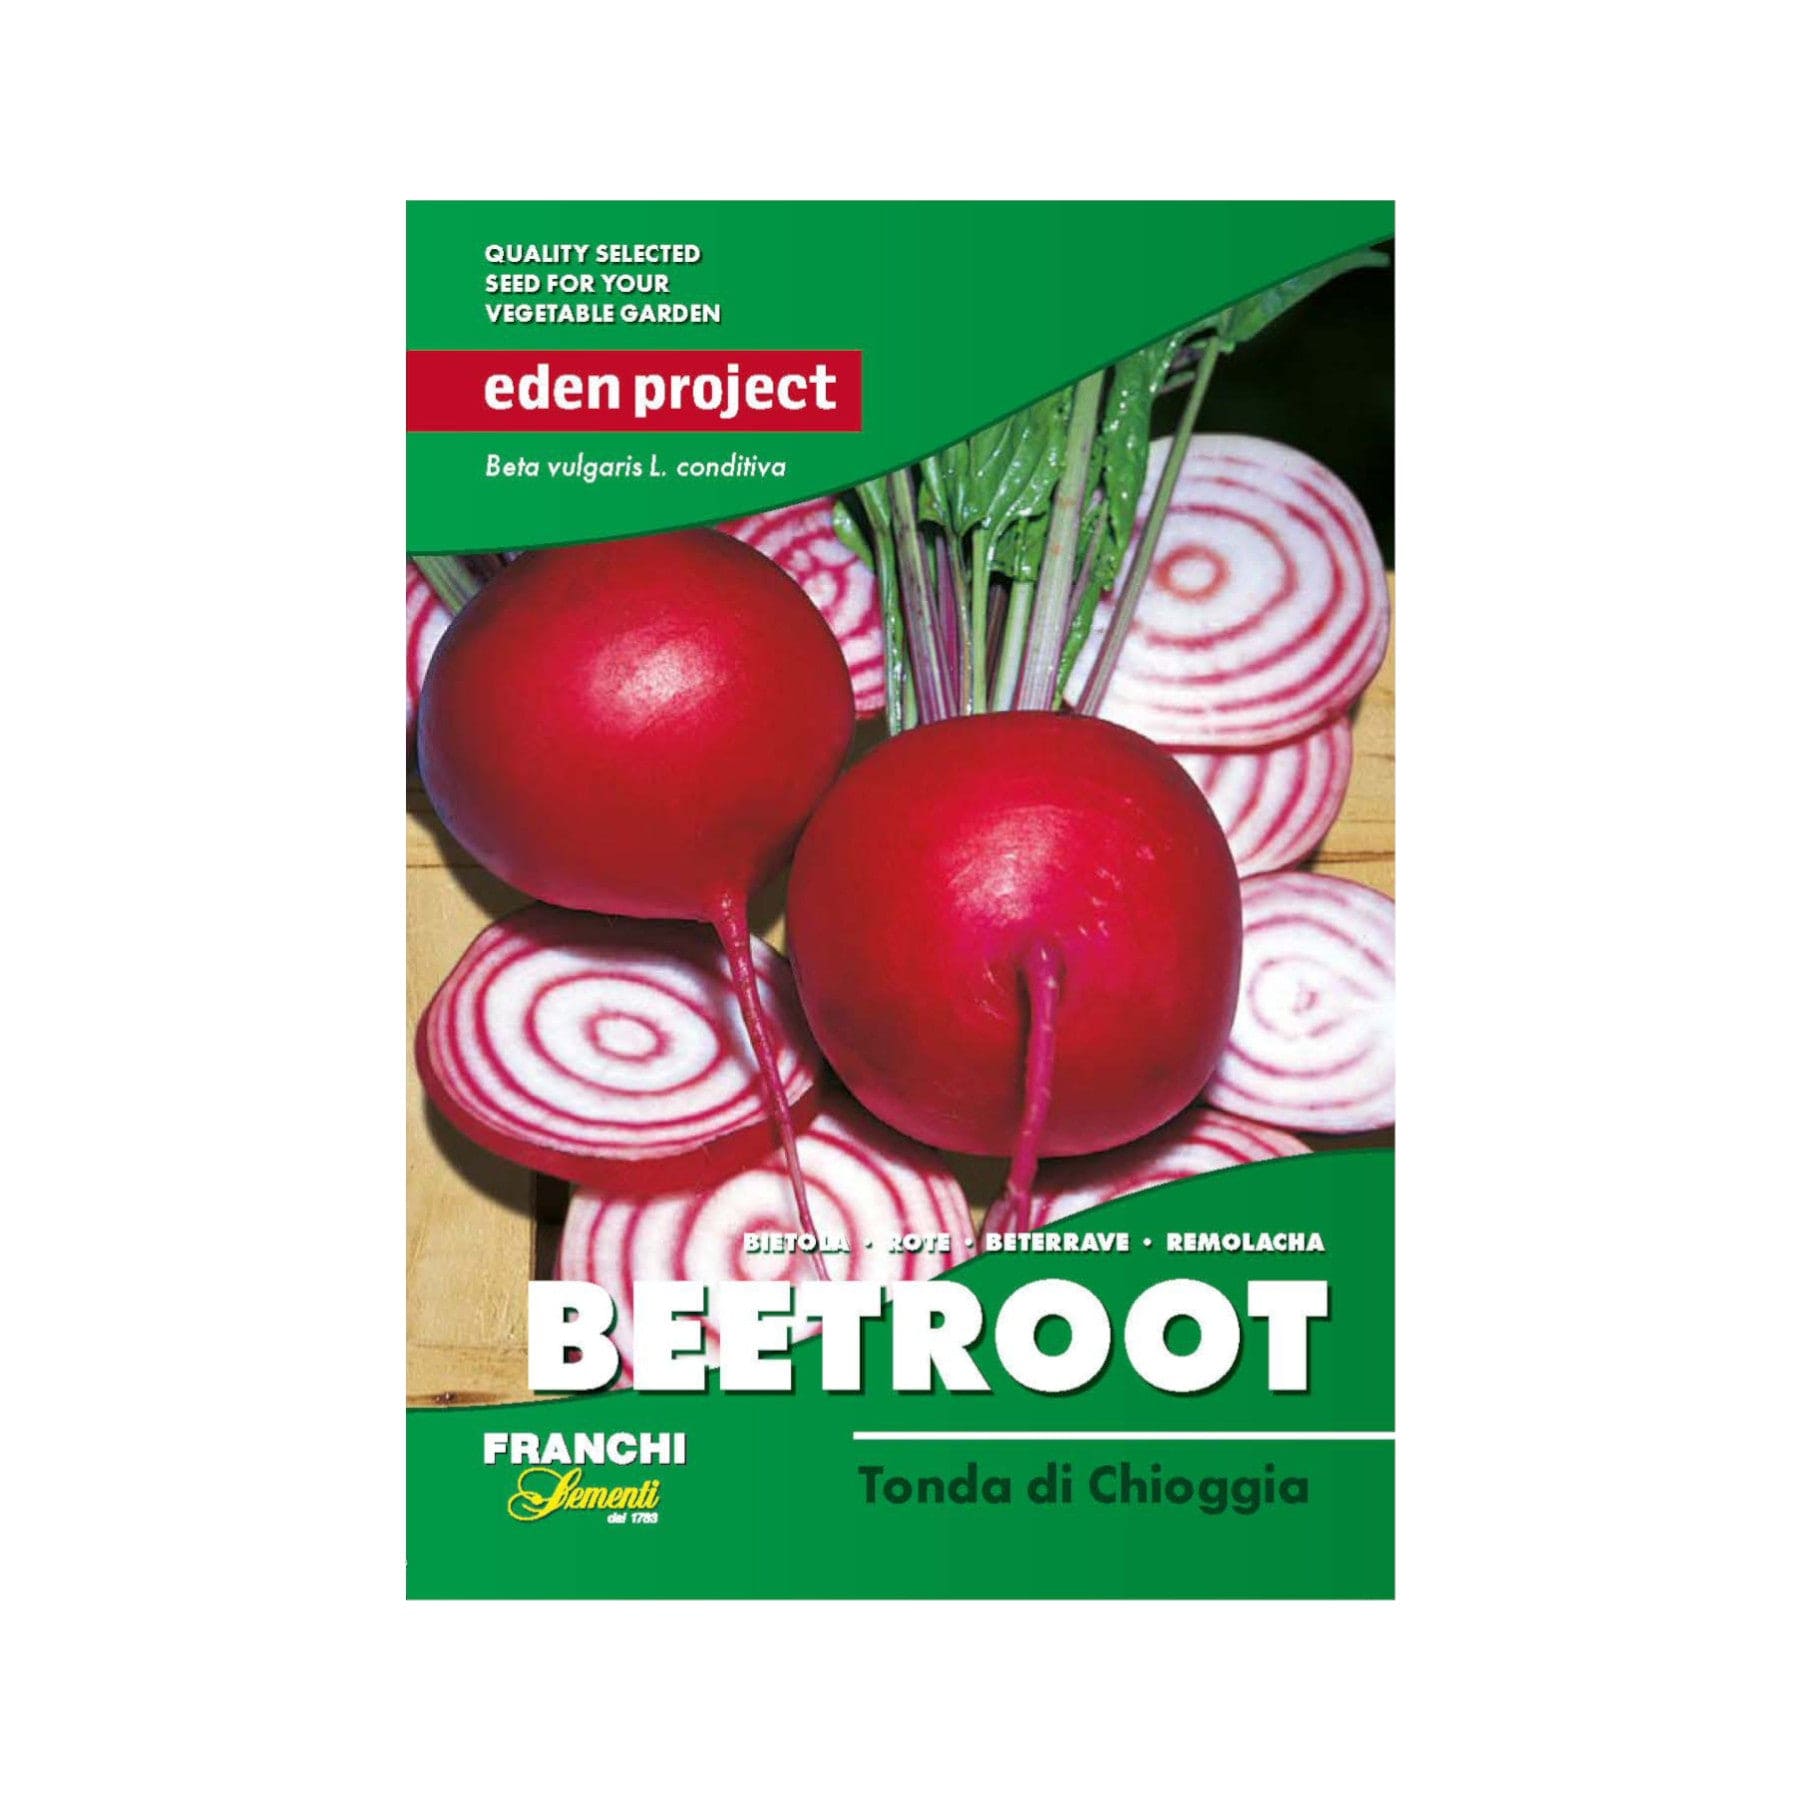 Beetroot seed packet from Eden Project, Franchi Sementi 1783, Tonda di Chioggia variety with image of sliced beetroots displaying concentric white and red rings, quality selected seeds for vegetable garden